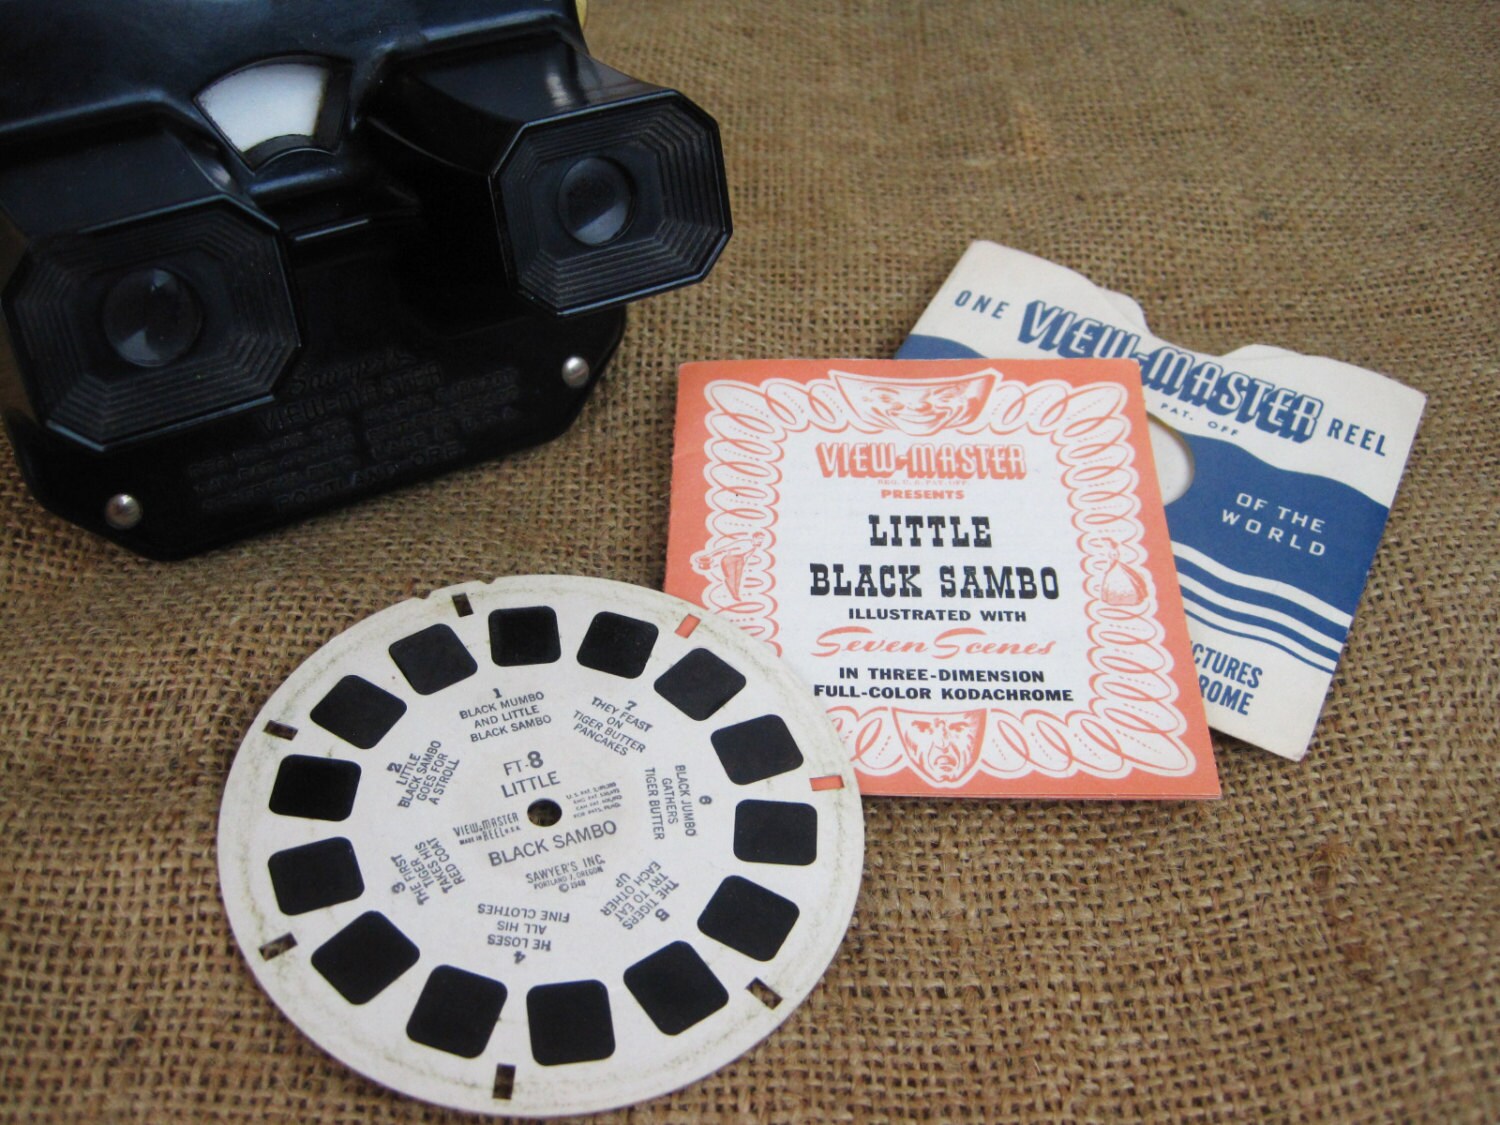 1948 Little Black Sambo View-master Reel and Story Book FT-8 | Etsy New  Zealand